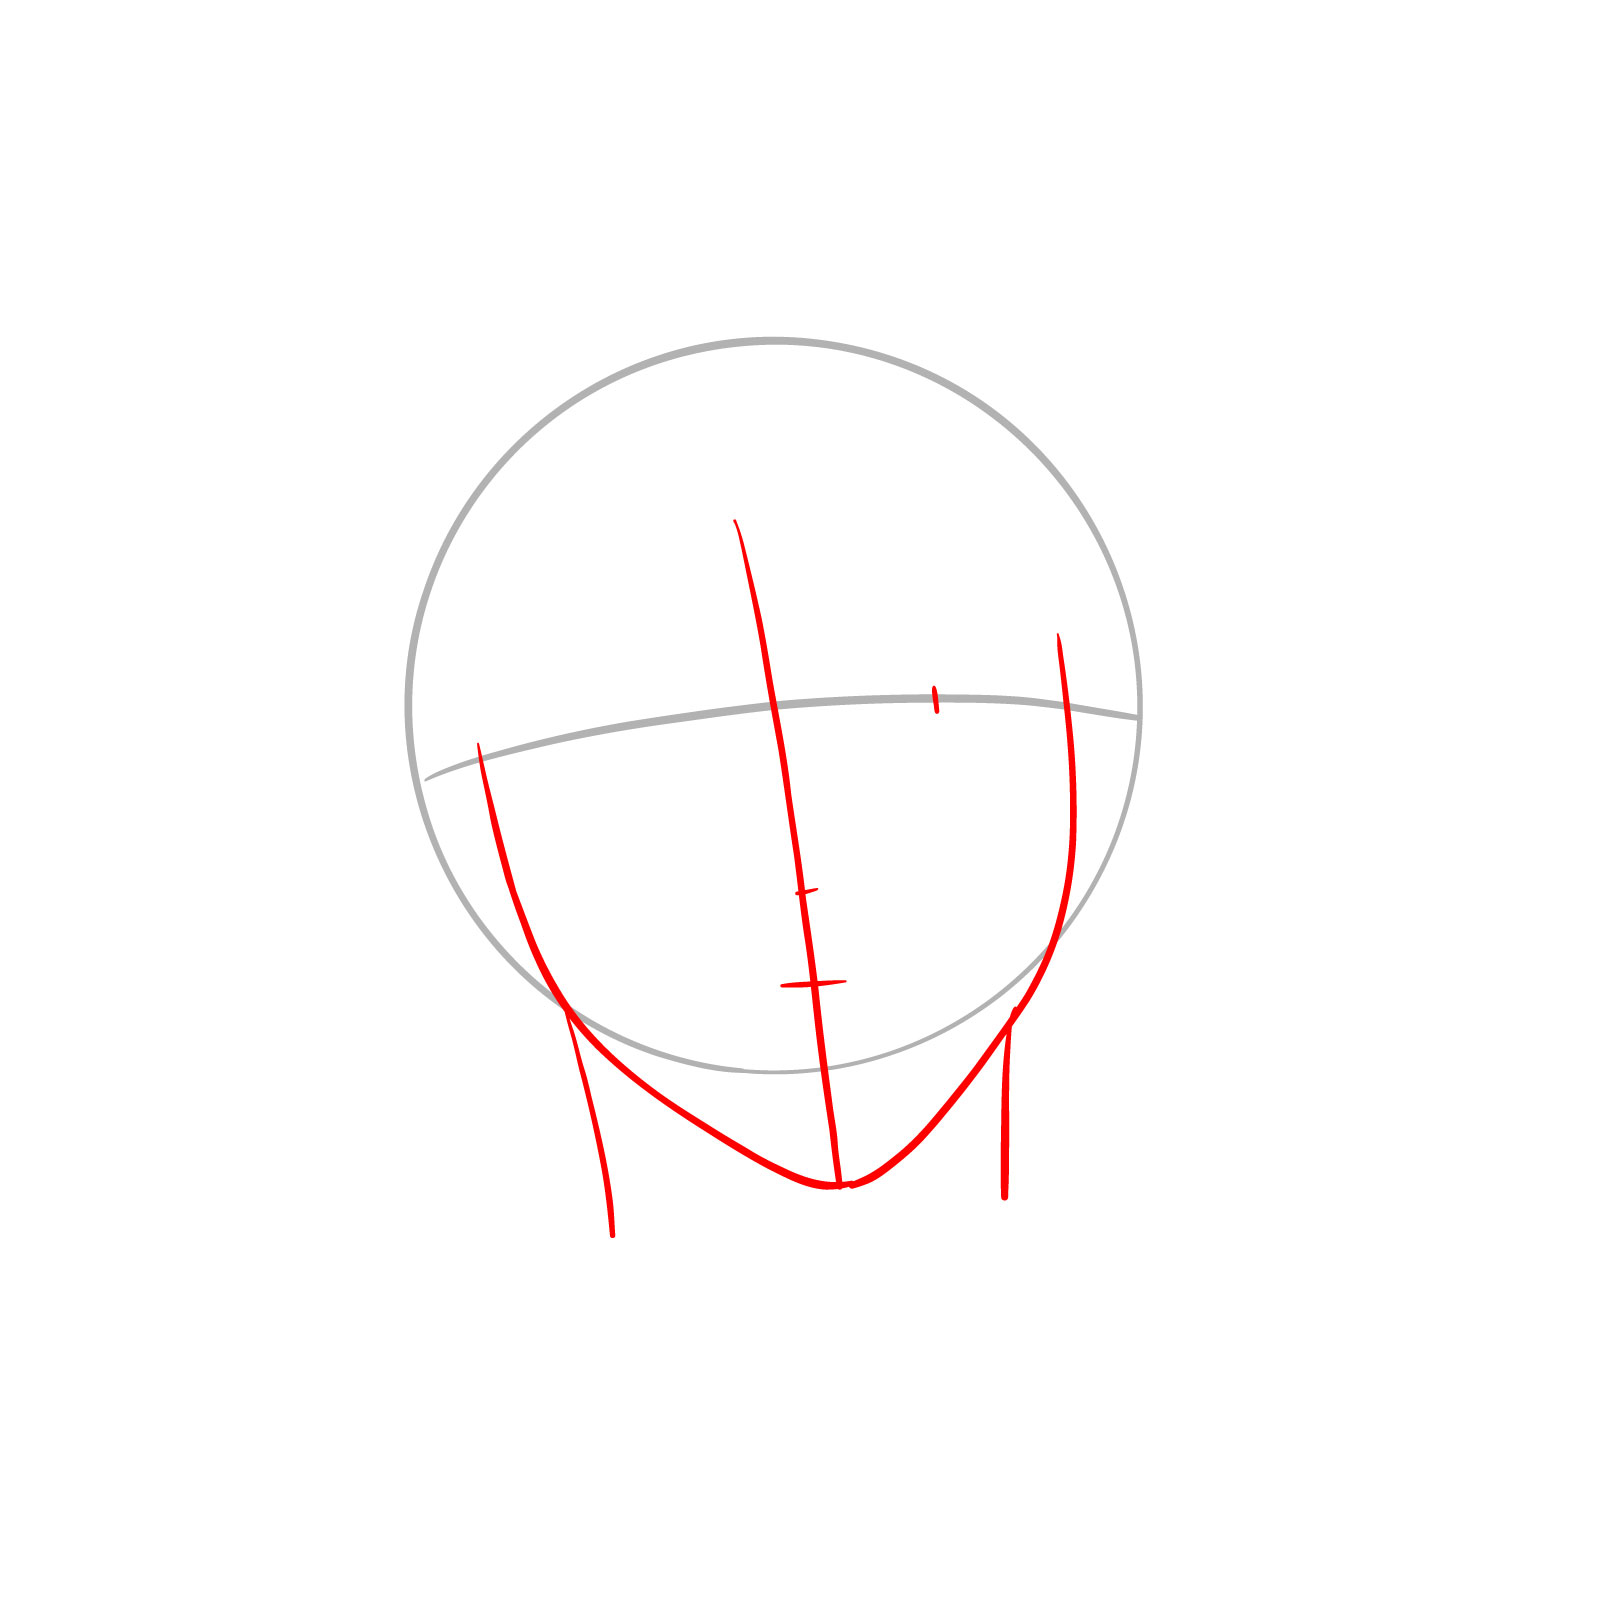 Step-by-step instruction on drawing Levi Ackerman's face showing the outline of the face and neck - step 02